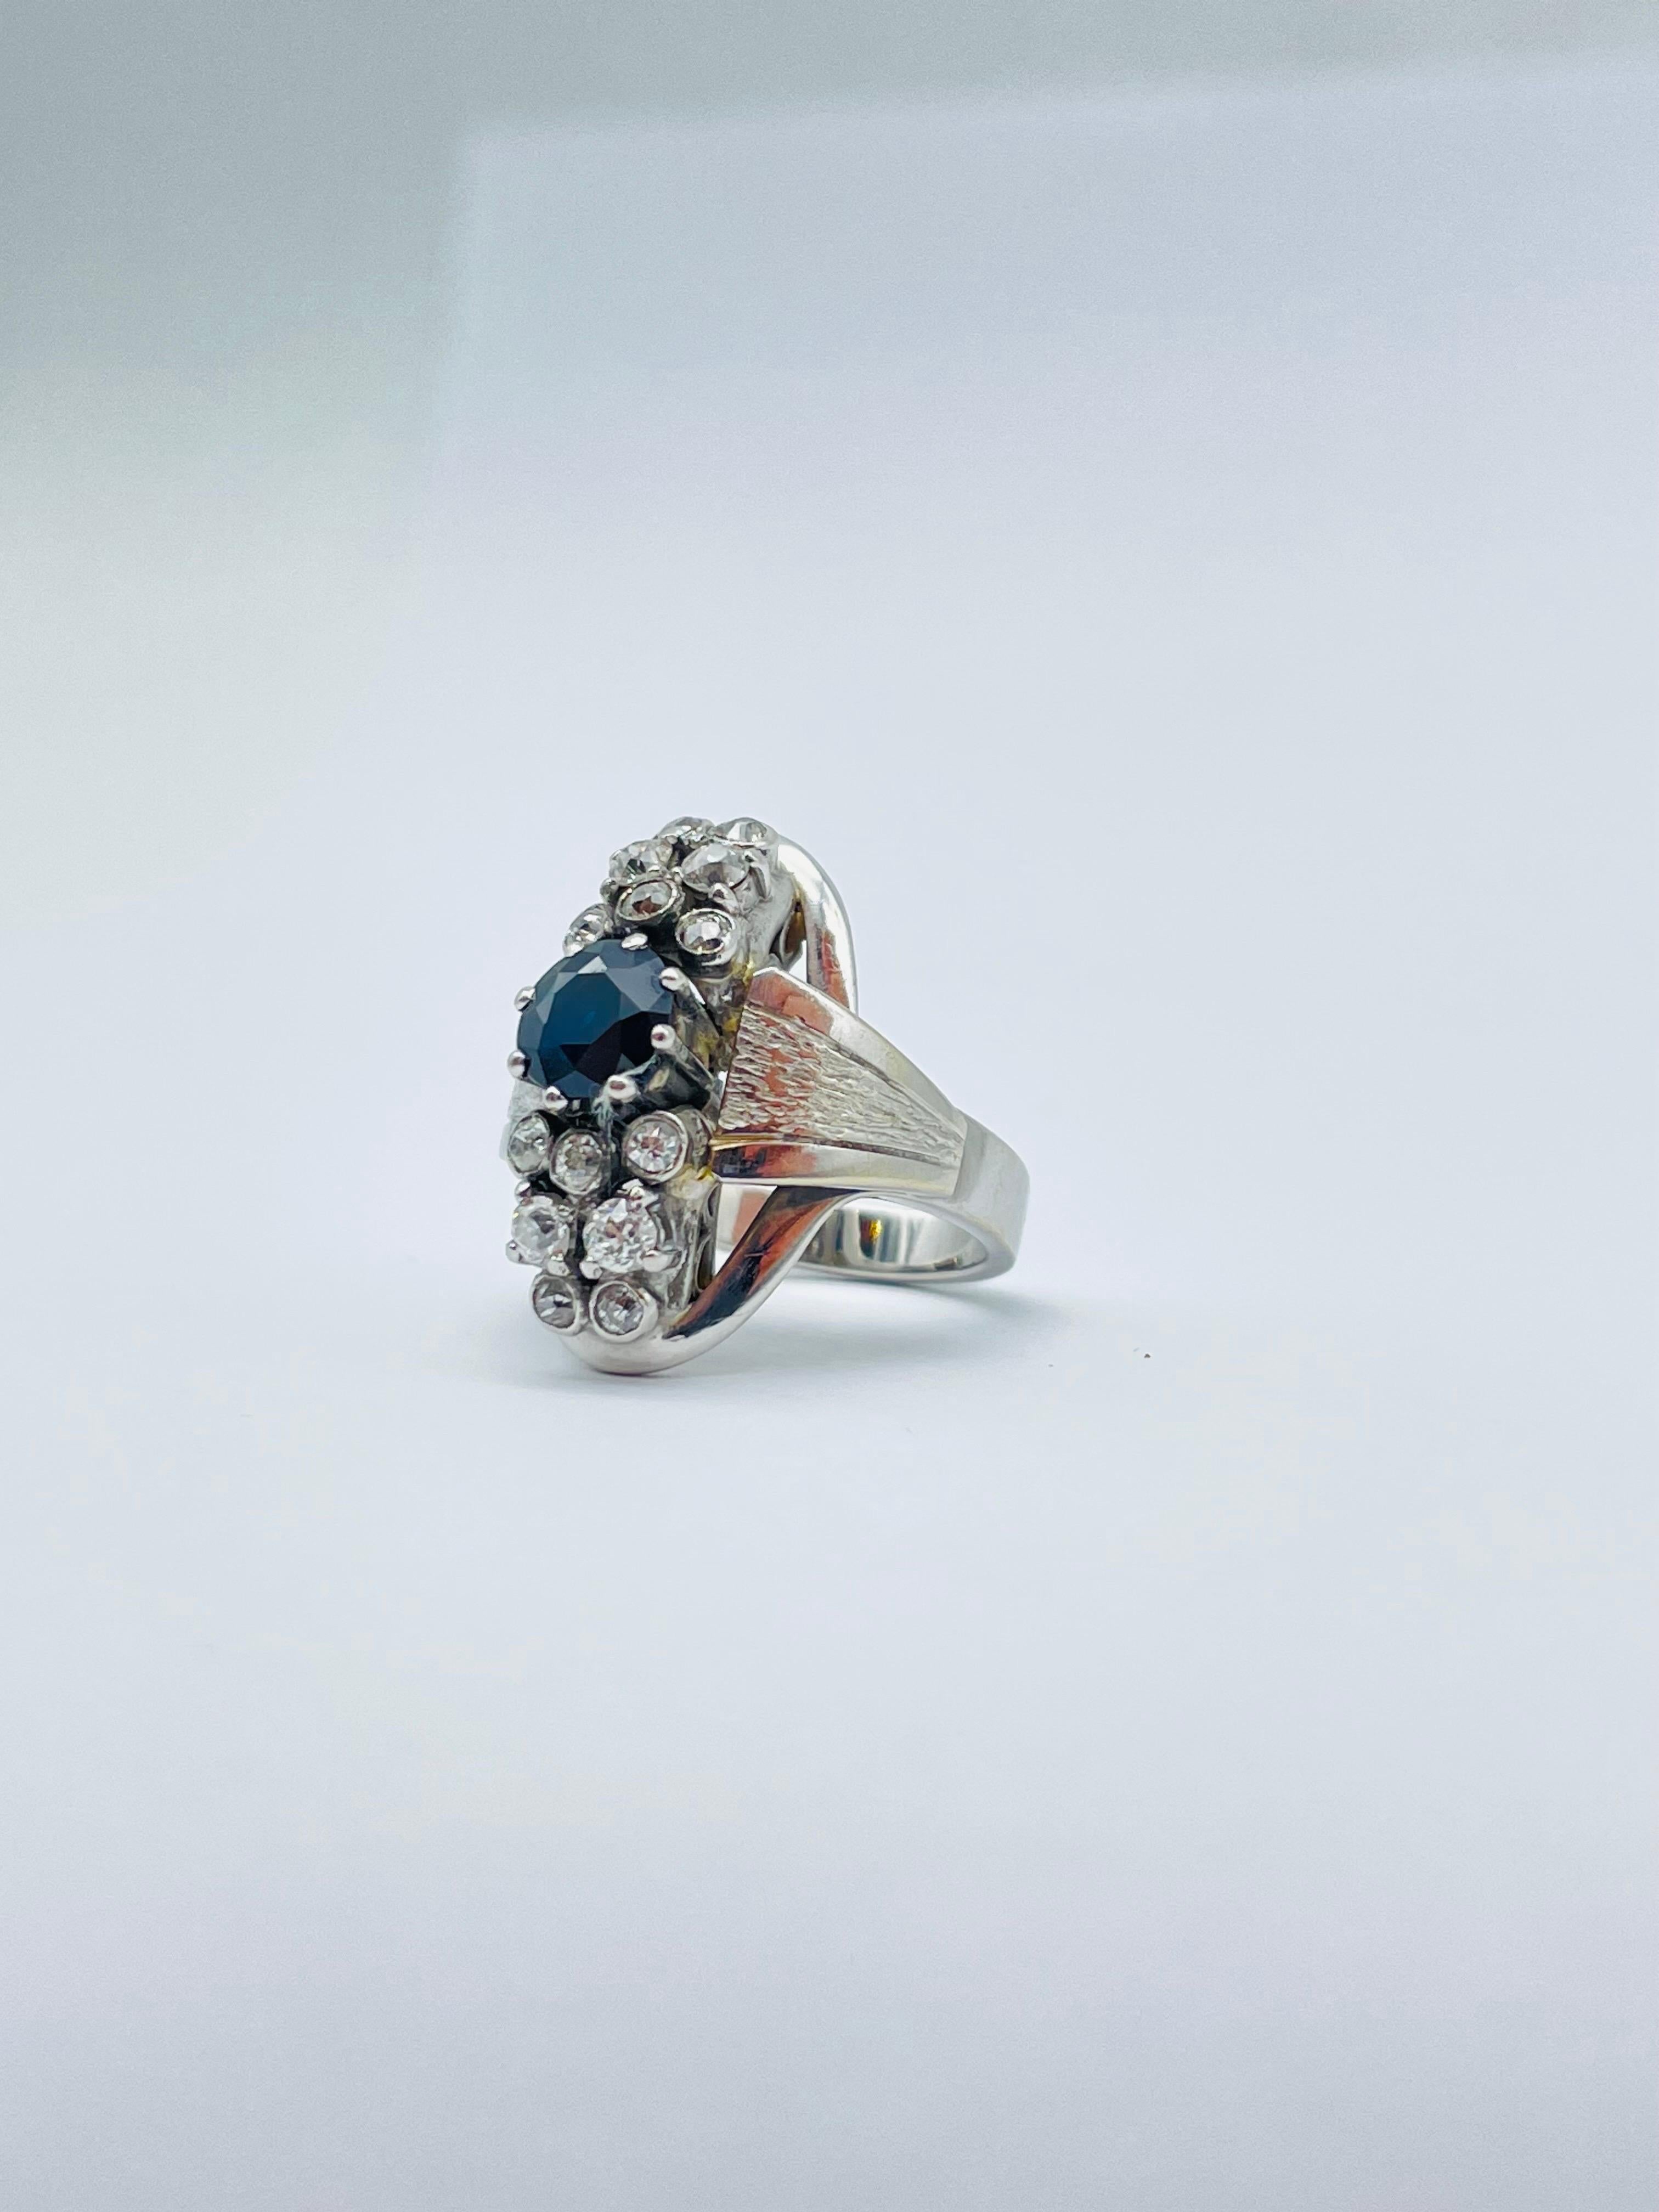 Behold the majestic 14k white gold ring with diamonds and sapphire, a true masterpiece of jewelry design. Expertly crafted from the finest materials, this ring boasts a solid 14 karat white gold band that serves as a pristine canvas for the dazzling